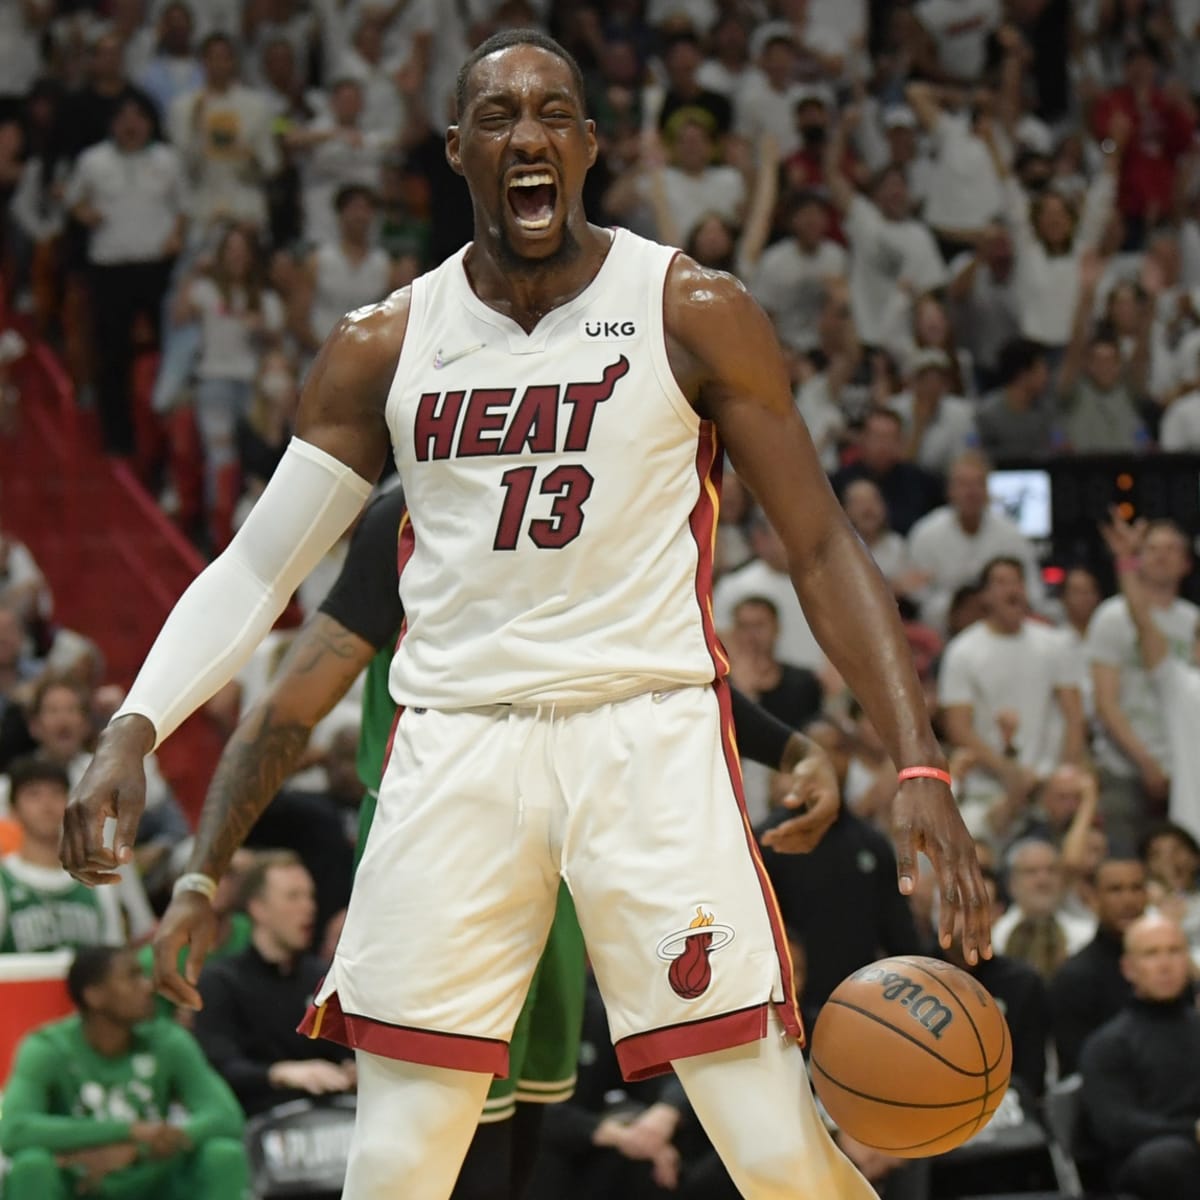 Video Of Bam Adebayo Ripping Off Jersey Goes Viral - Sports Illustrated  Miami Heat News, Analysis and More